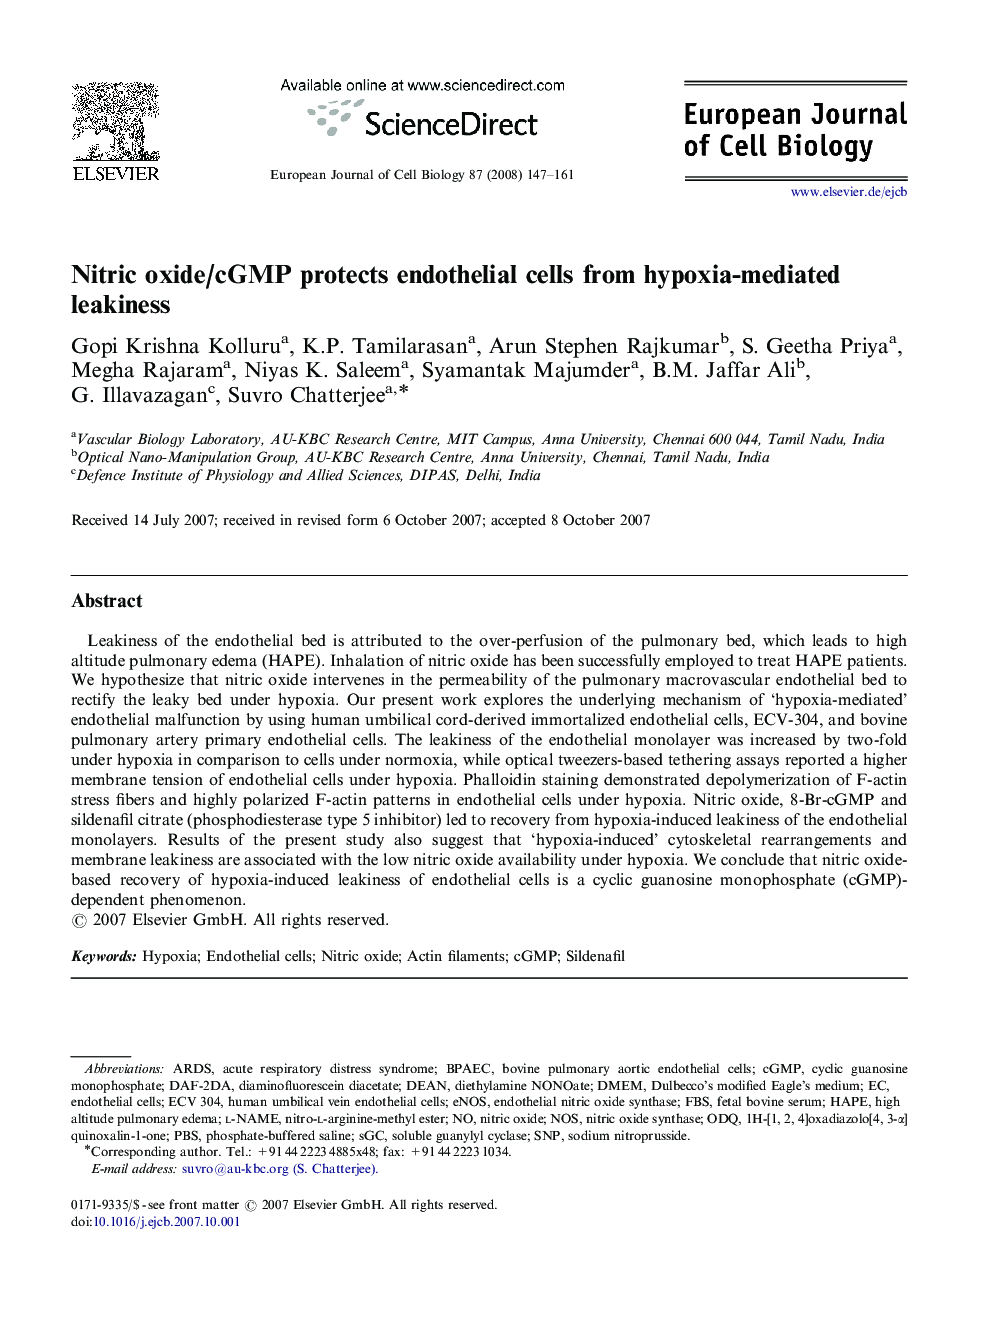 Nitric oxide/cGMP protects endothelial cells from hypoxia-mediated leakiness